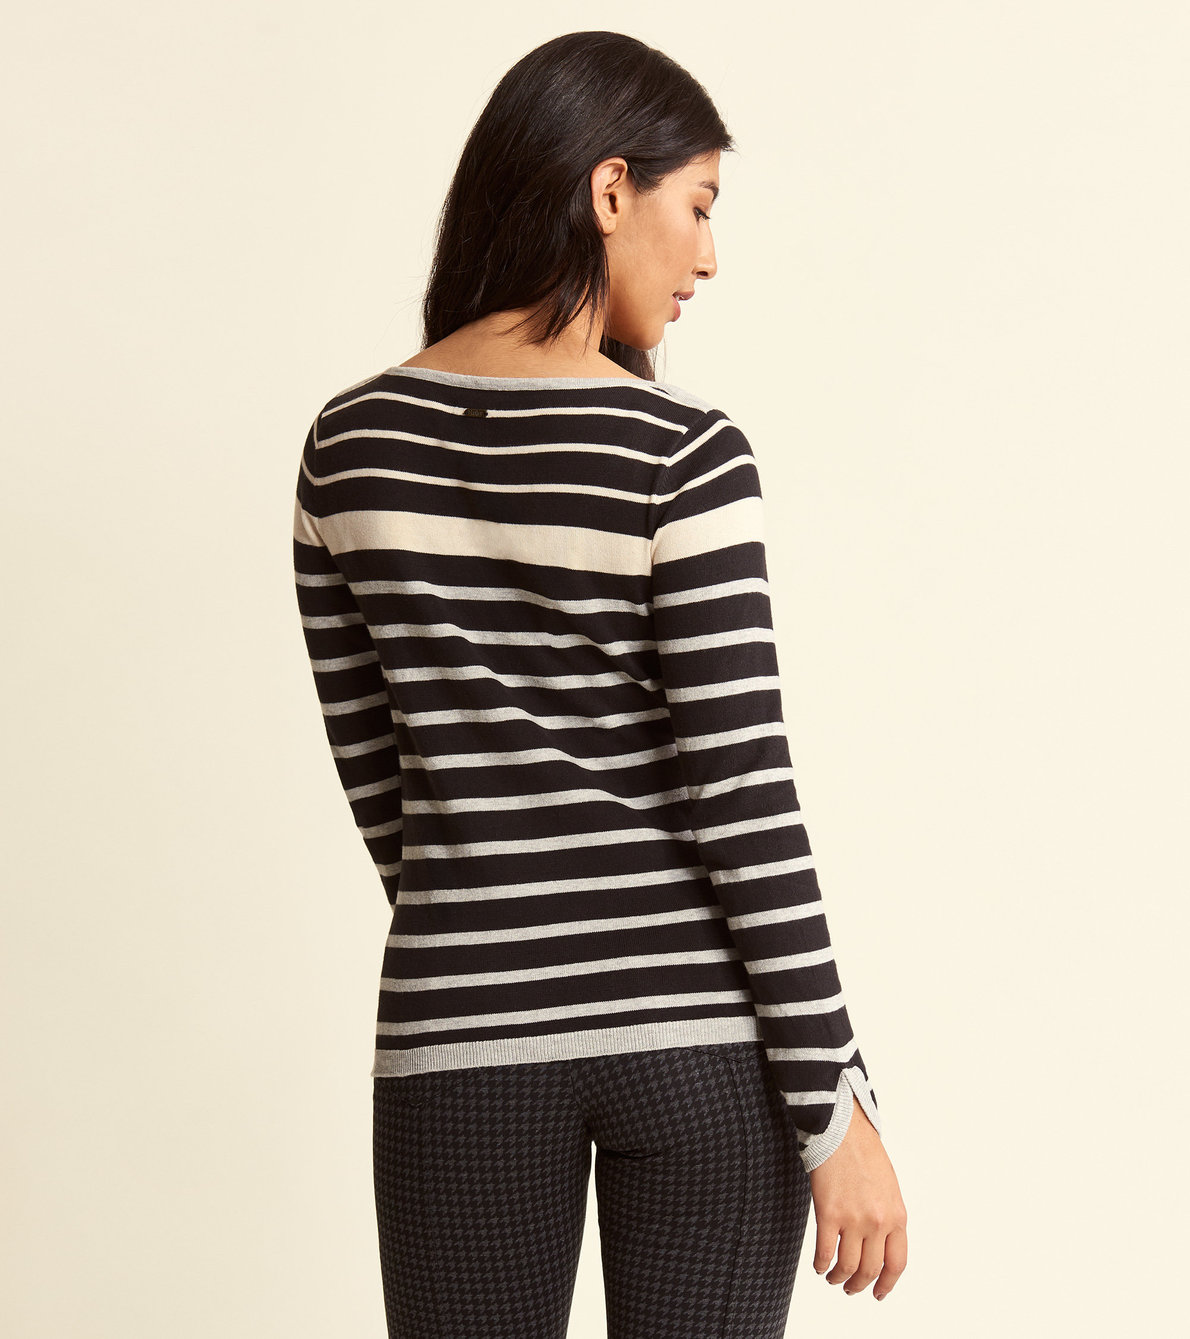 View larger image of Breton Sweater - Black and Grey Stripes